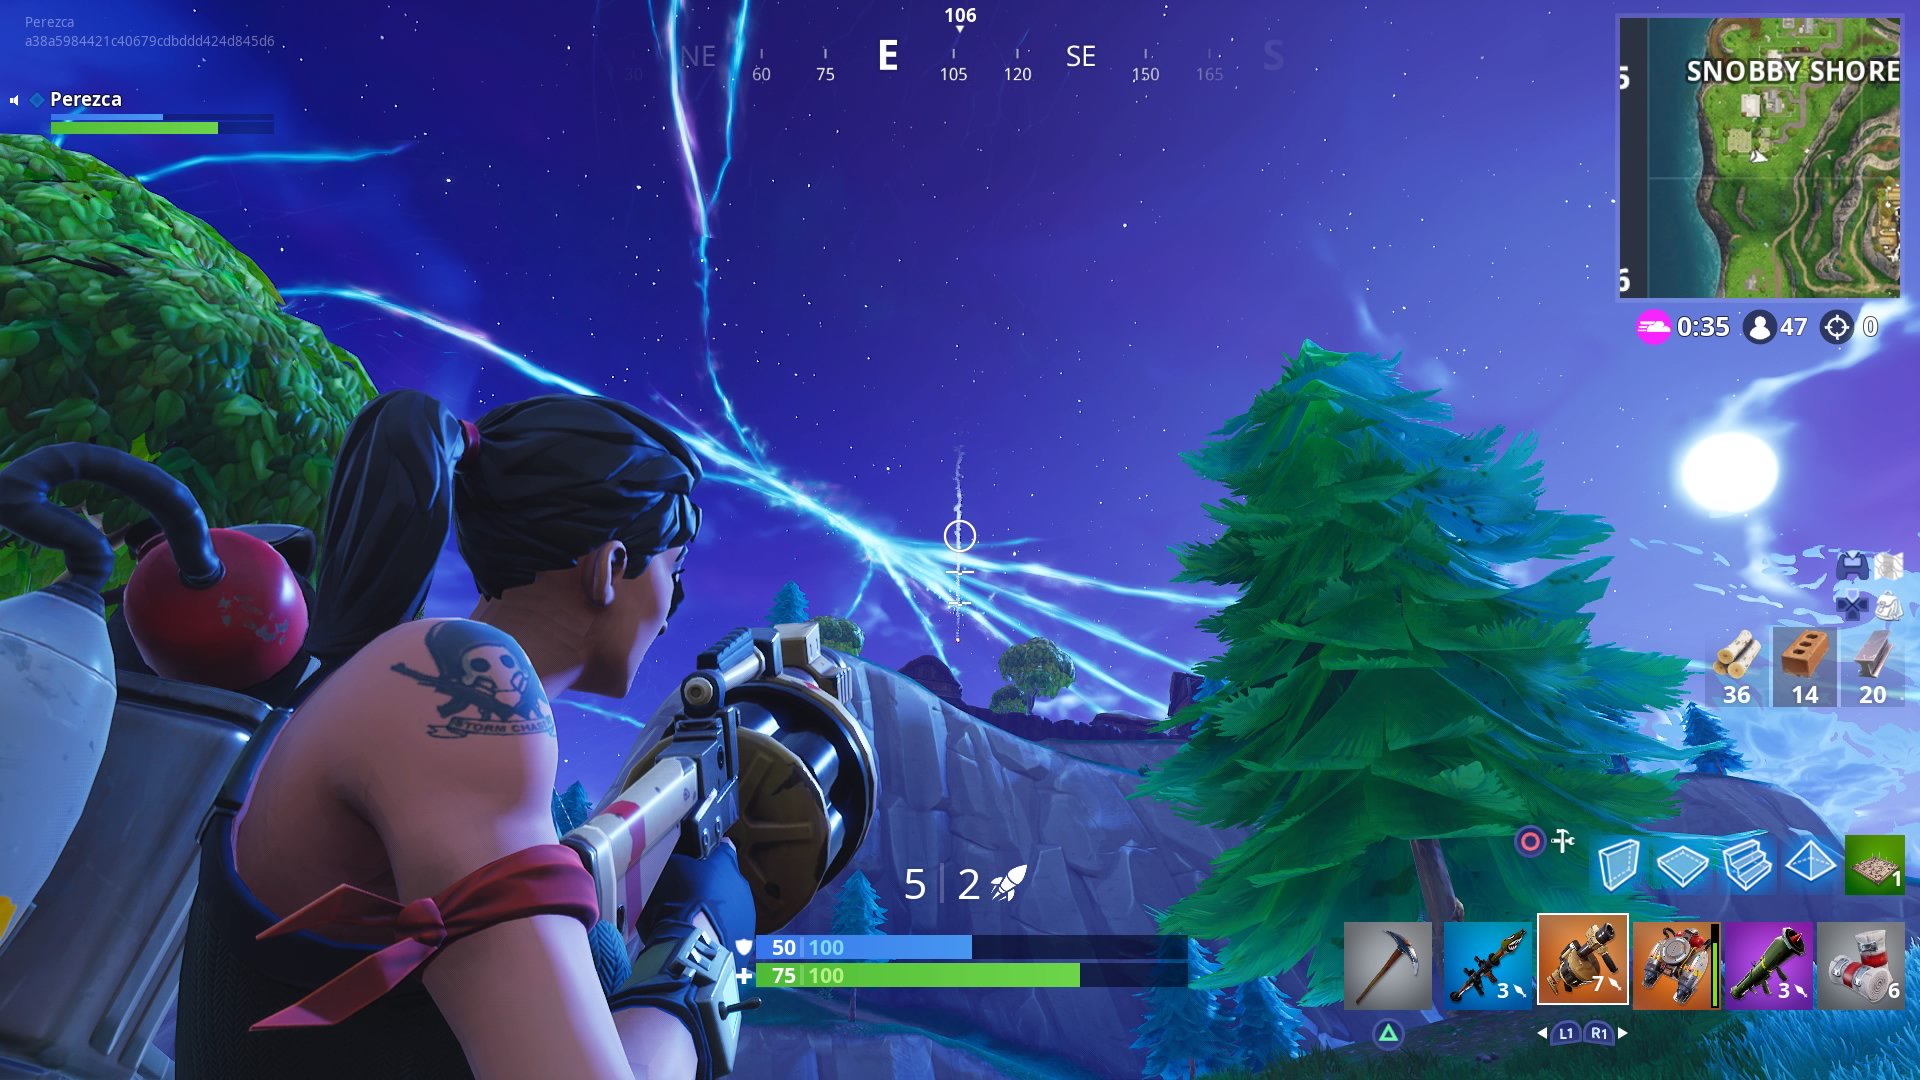 Fortnite crossplay (Nintendo Switch, Xbox One, PC, Mac, Mobile) confirmed,  Sony blocking PS4